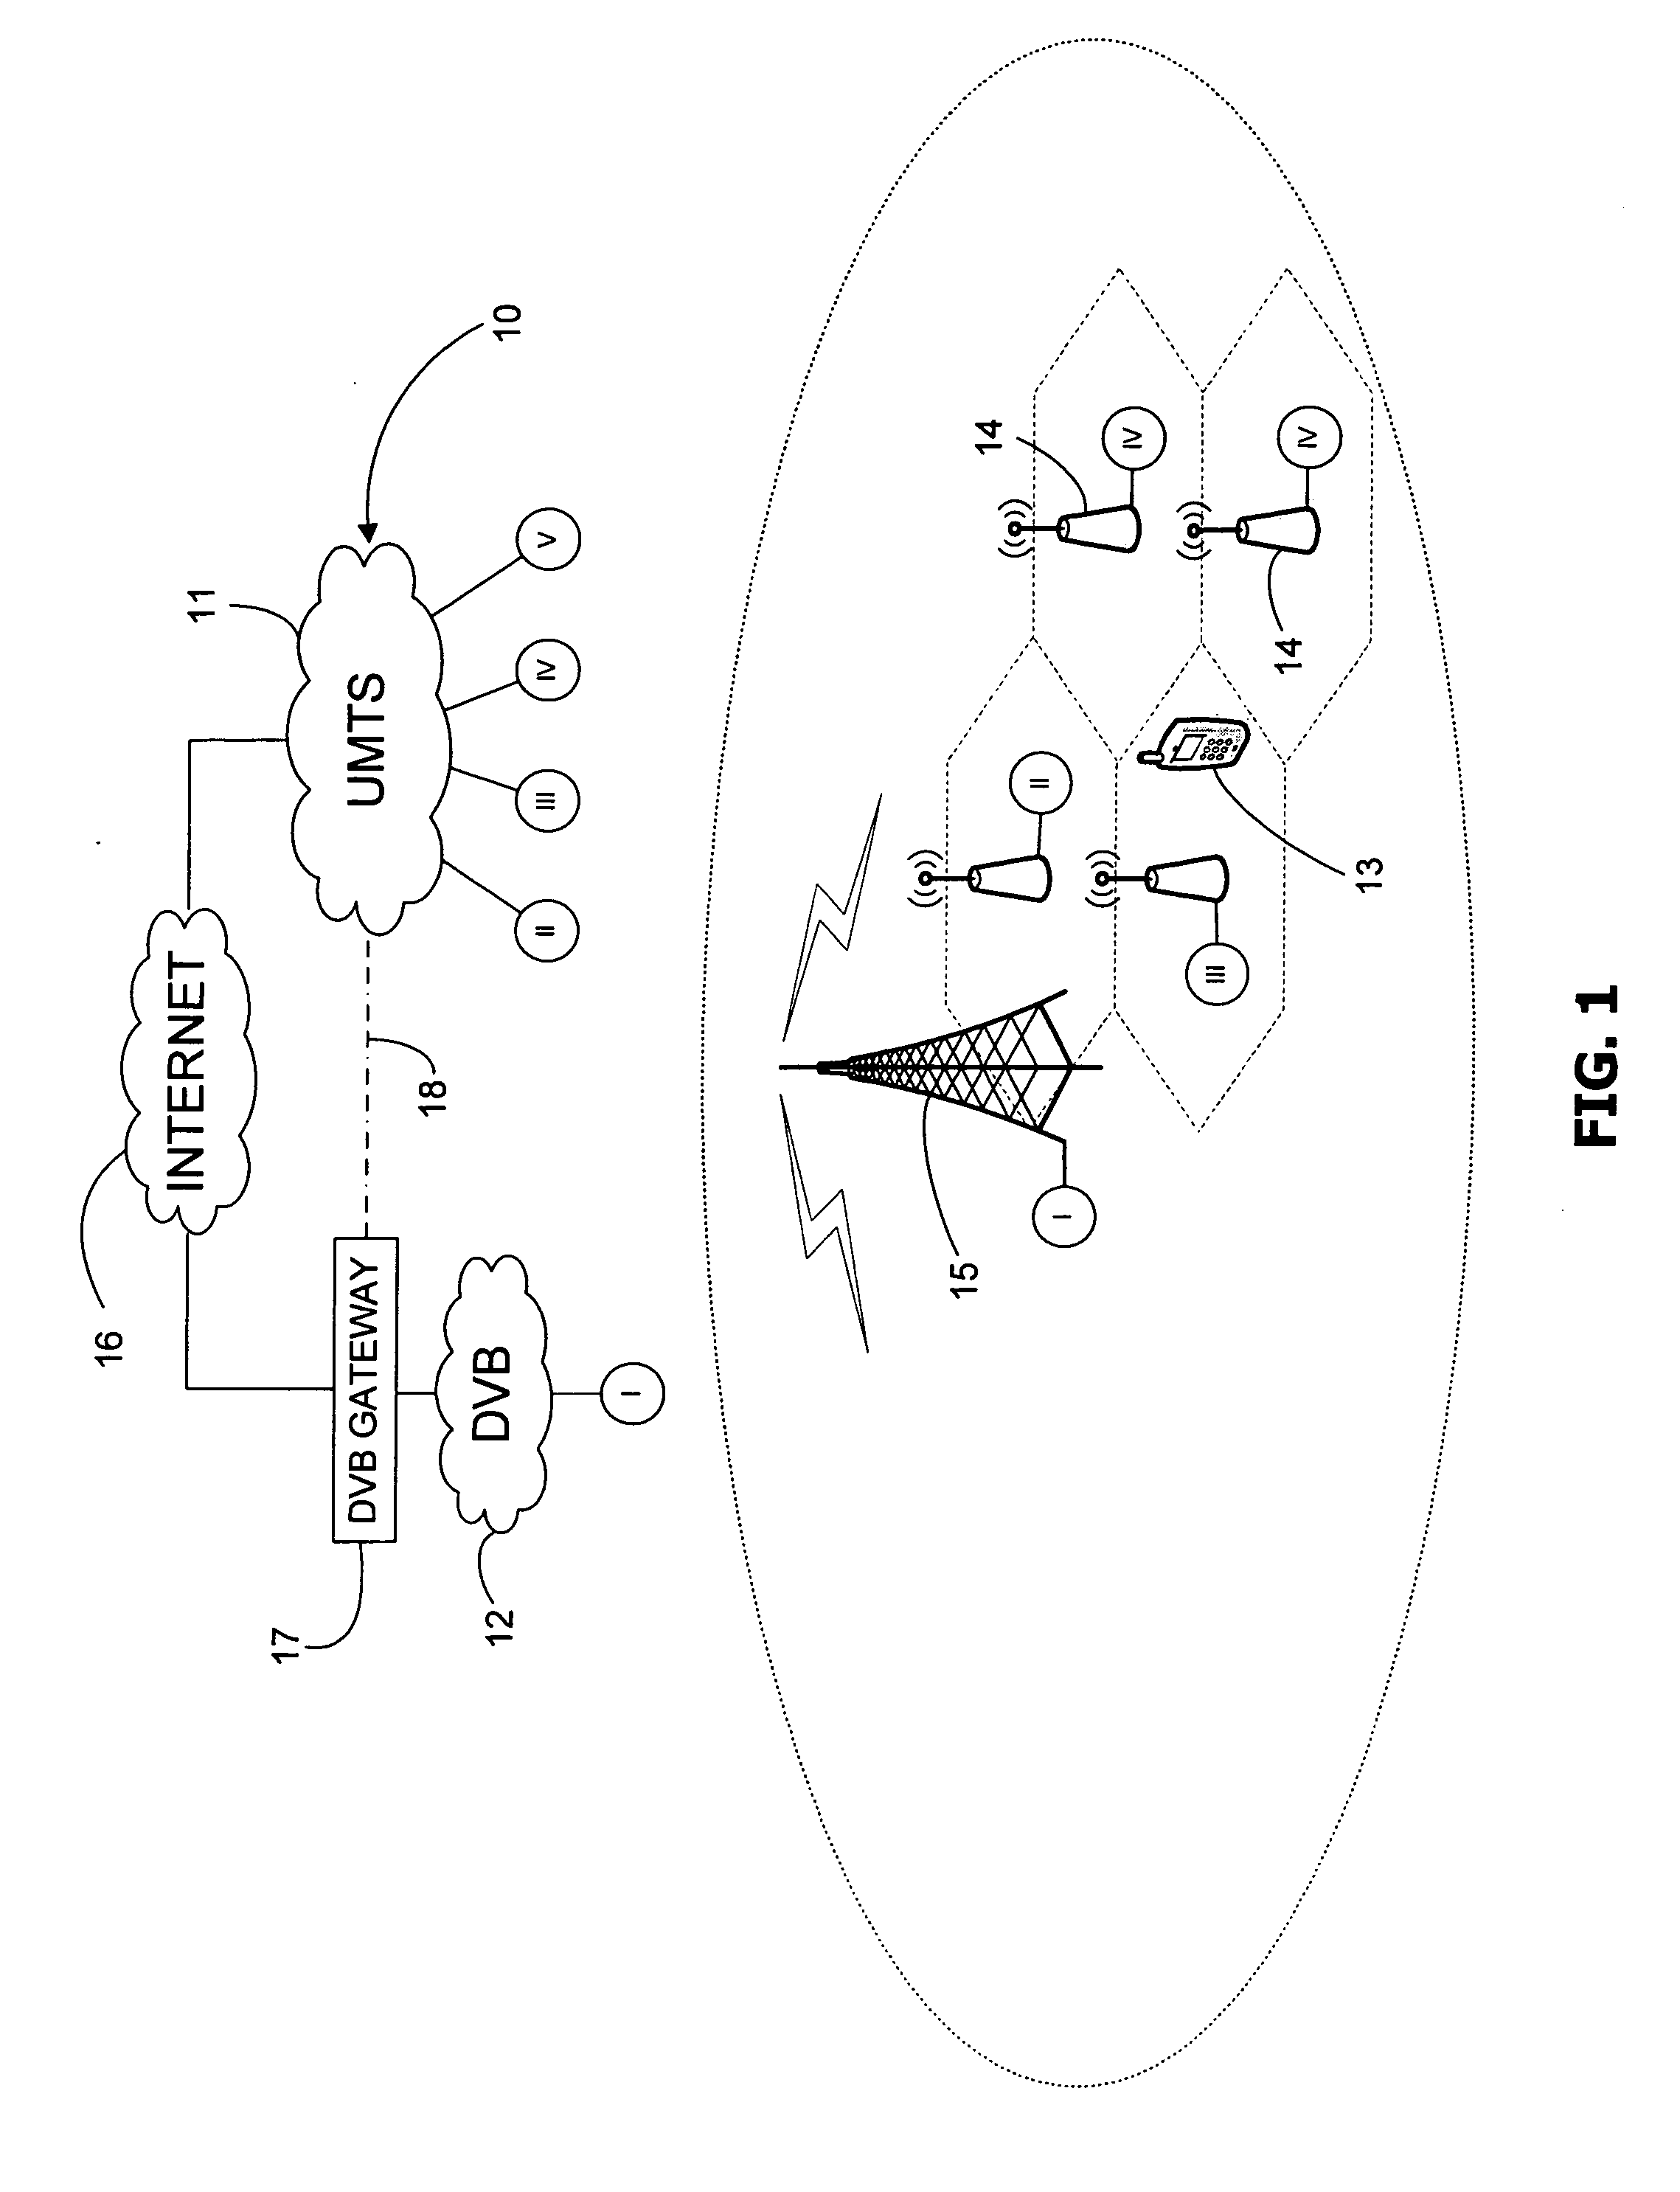 Method of providing access to packet-switched services in a heterogeneous network environment